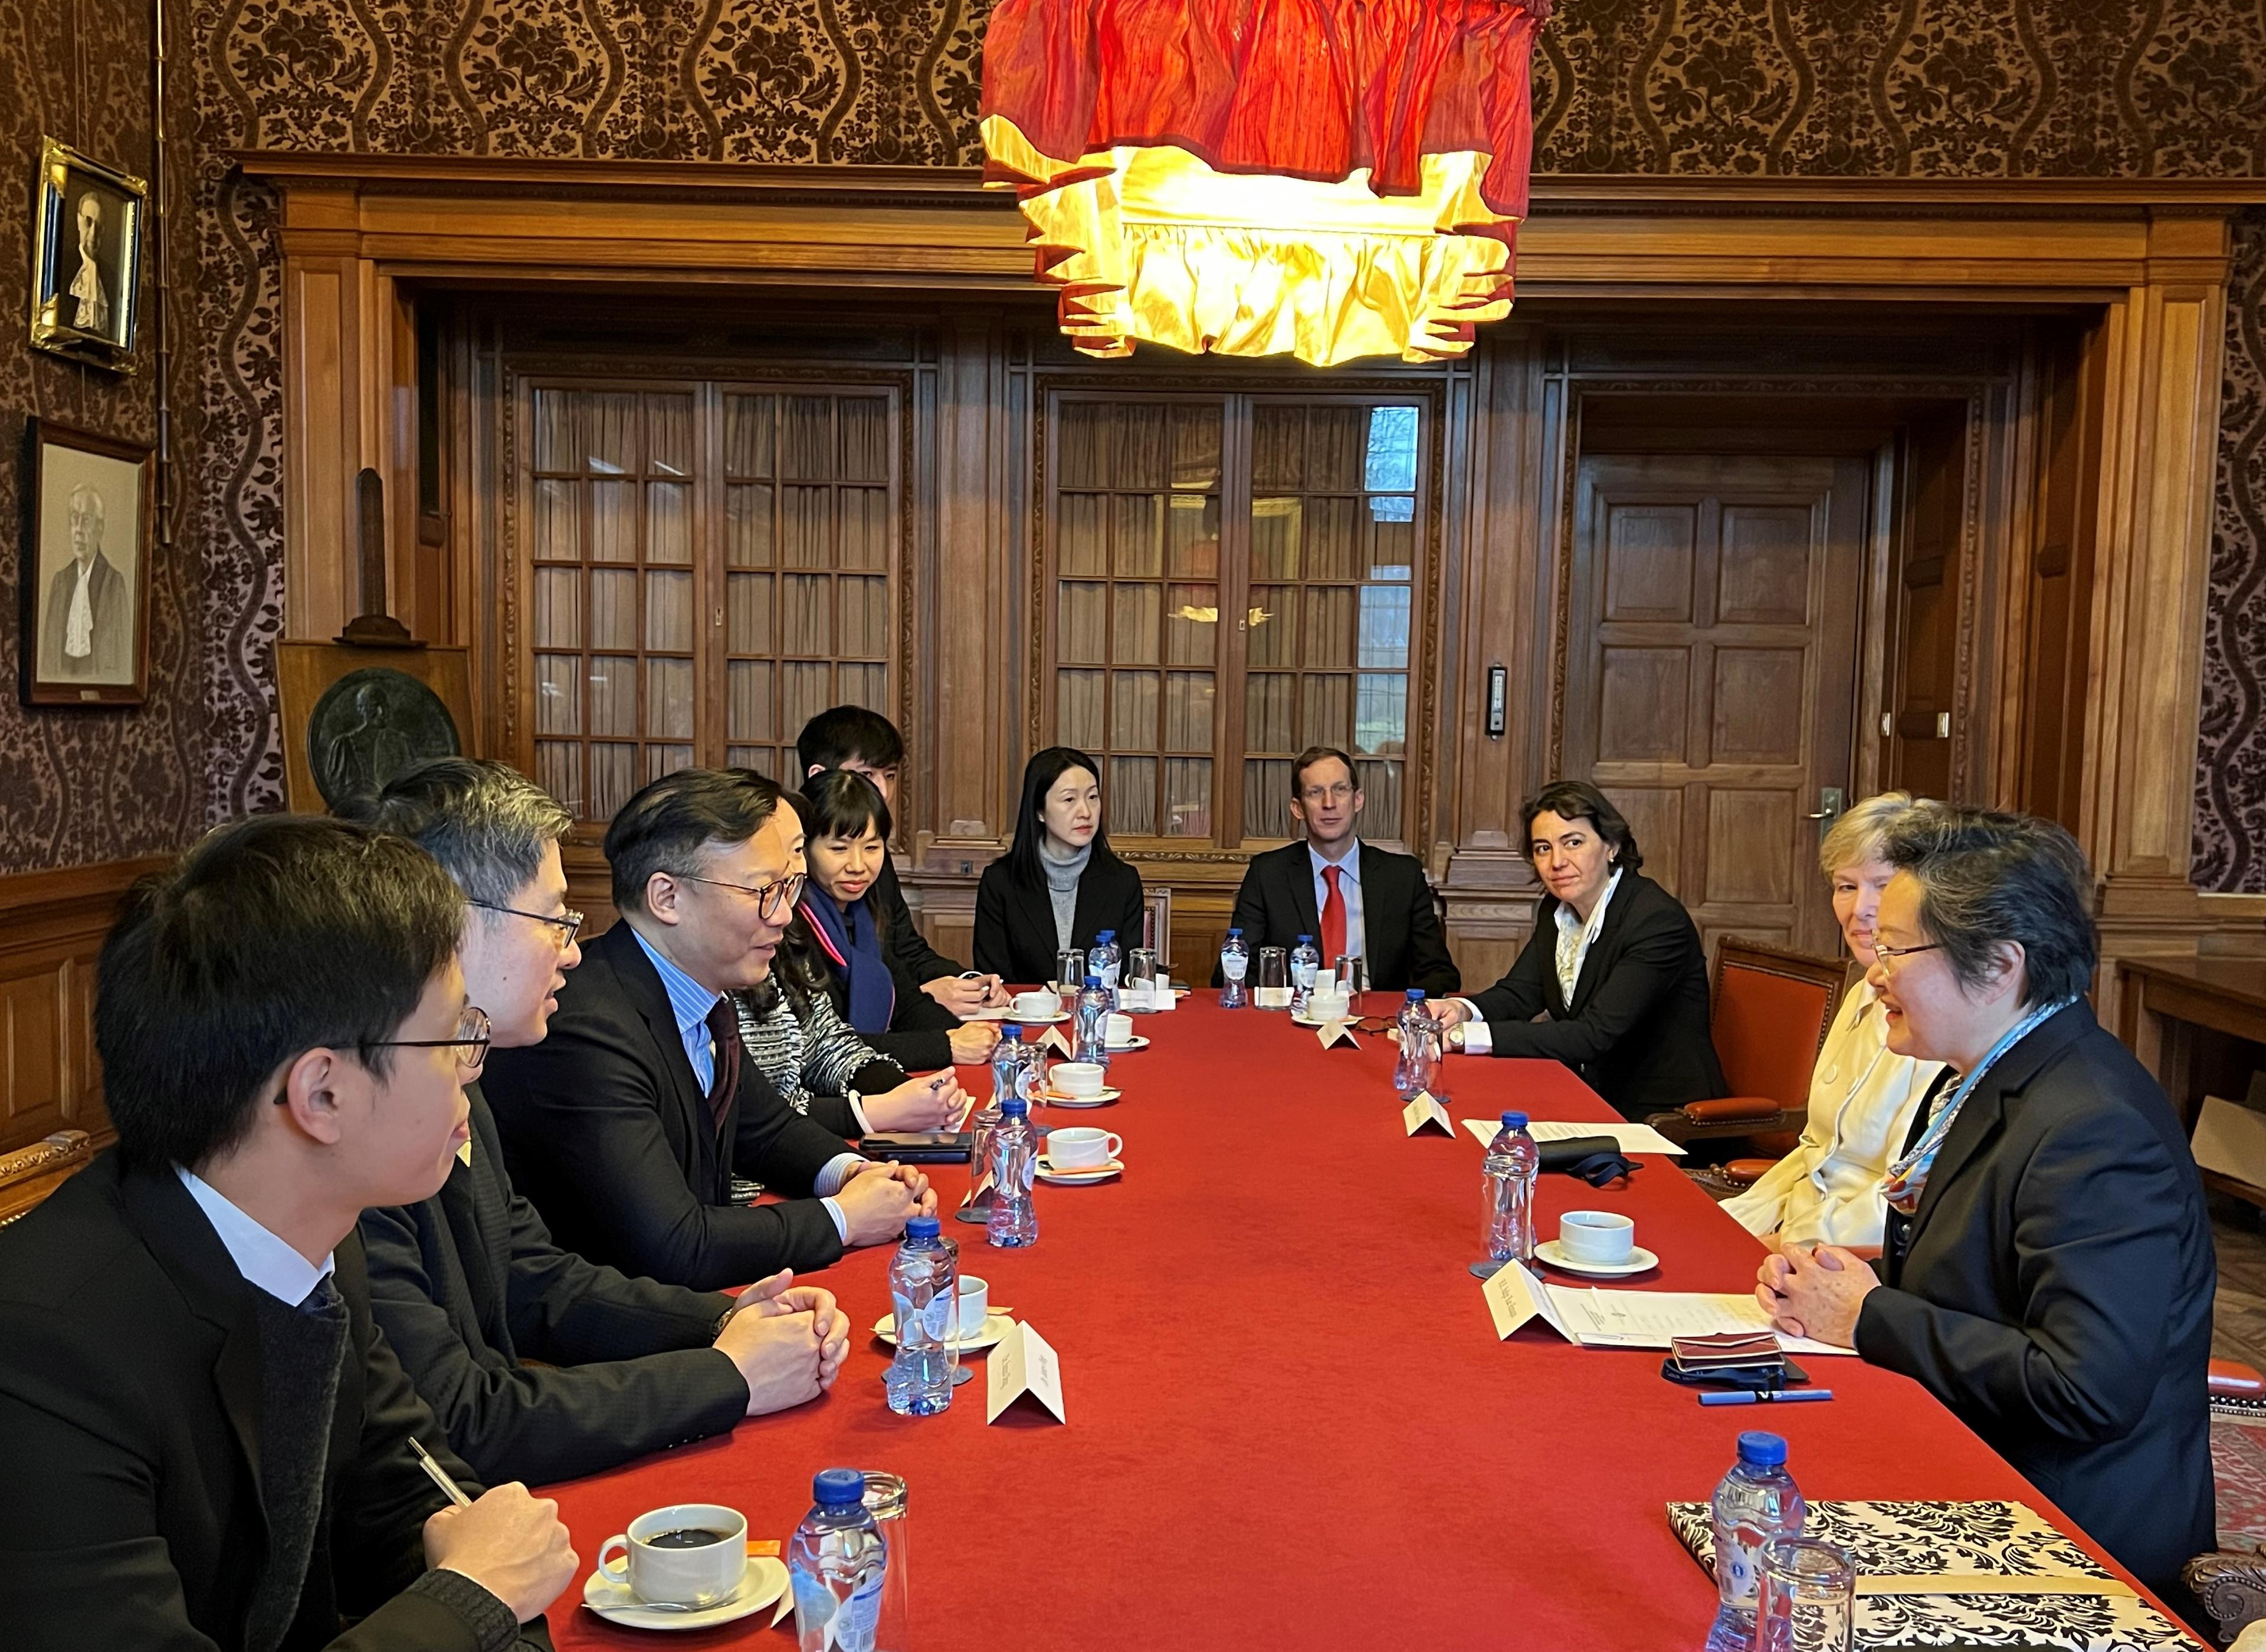 The Deputy Secretary for Justice, Mr Cheung Kwok-kwan (third left), met with Judge Xue Hanqin (first right), Judge Hilary Charlesworth (second right) and senior officers of the United Nations International Court of Justice in The Hague, the Netherlands, on March 10 (The Hague time).